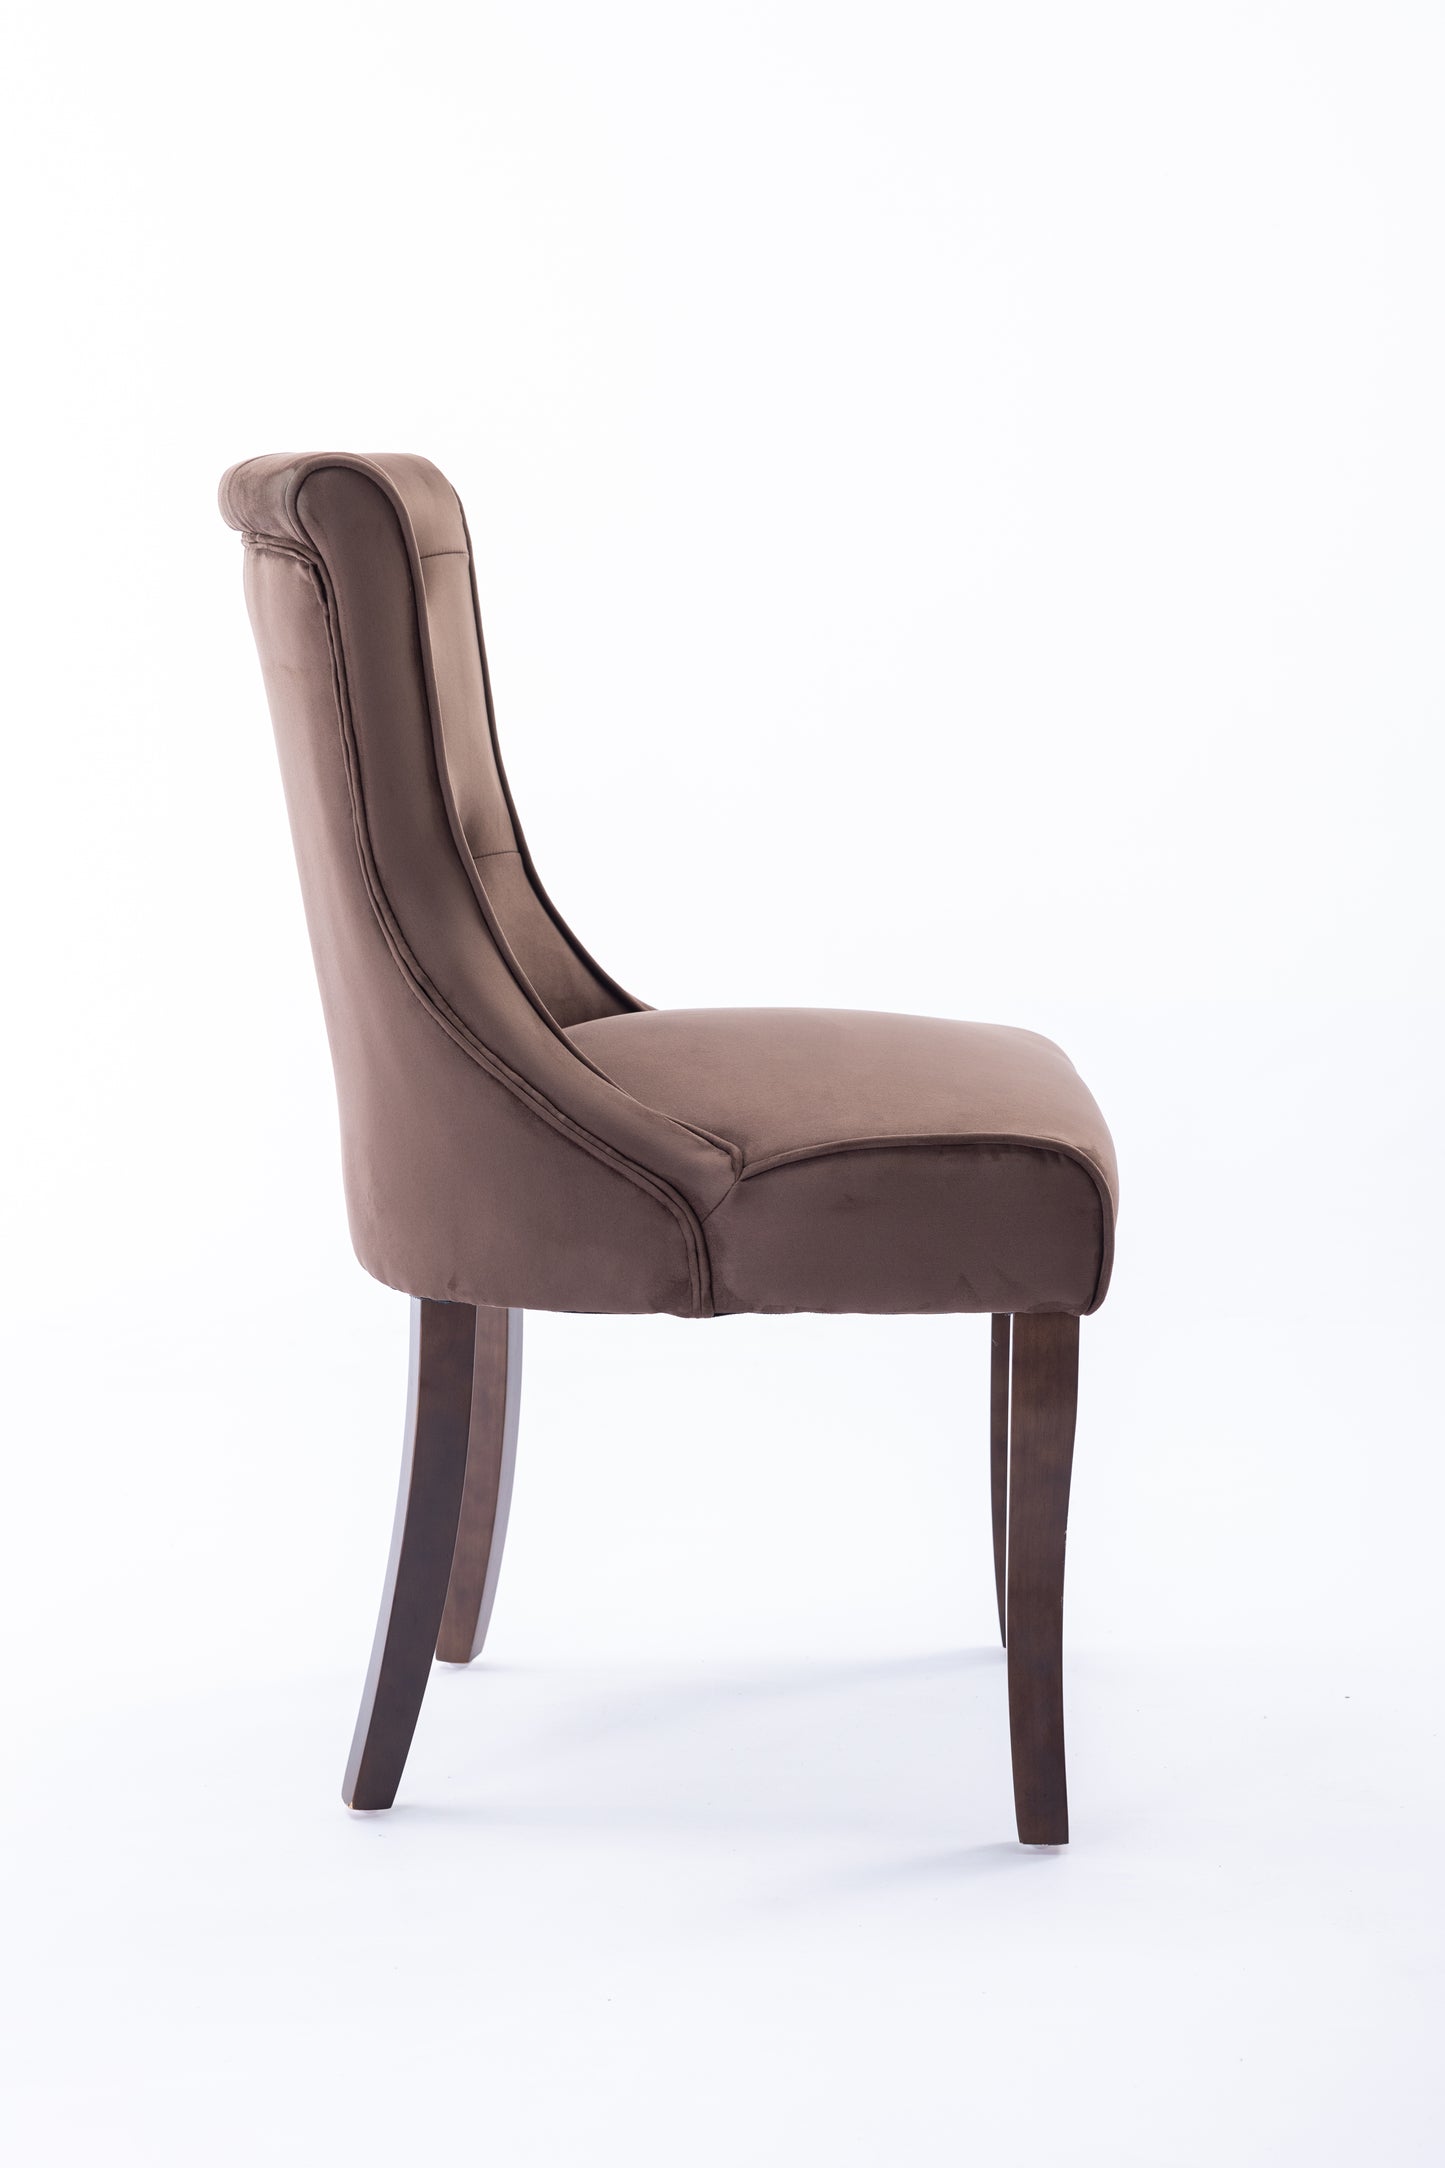 Kingston Cocoa Faux Suede Dining Chair